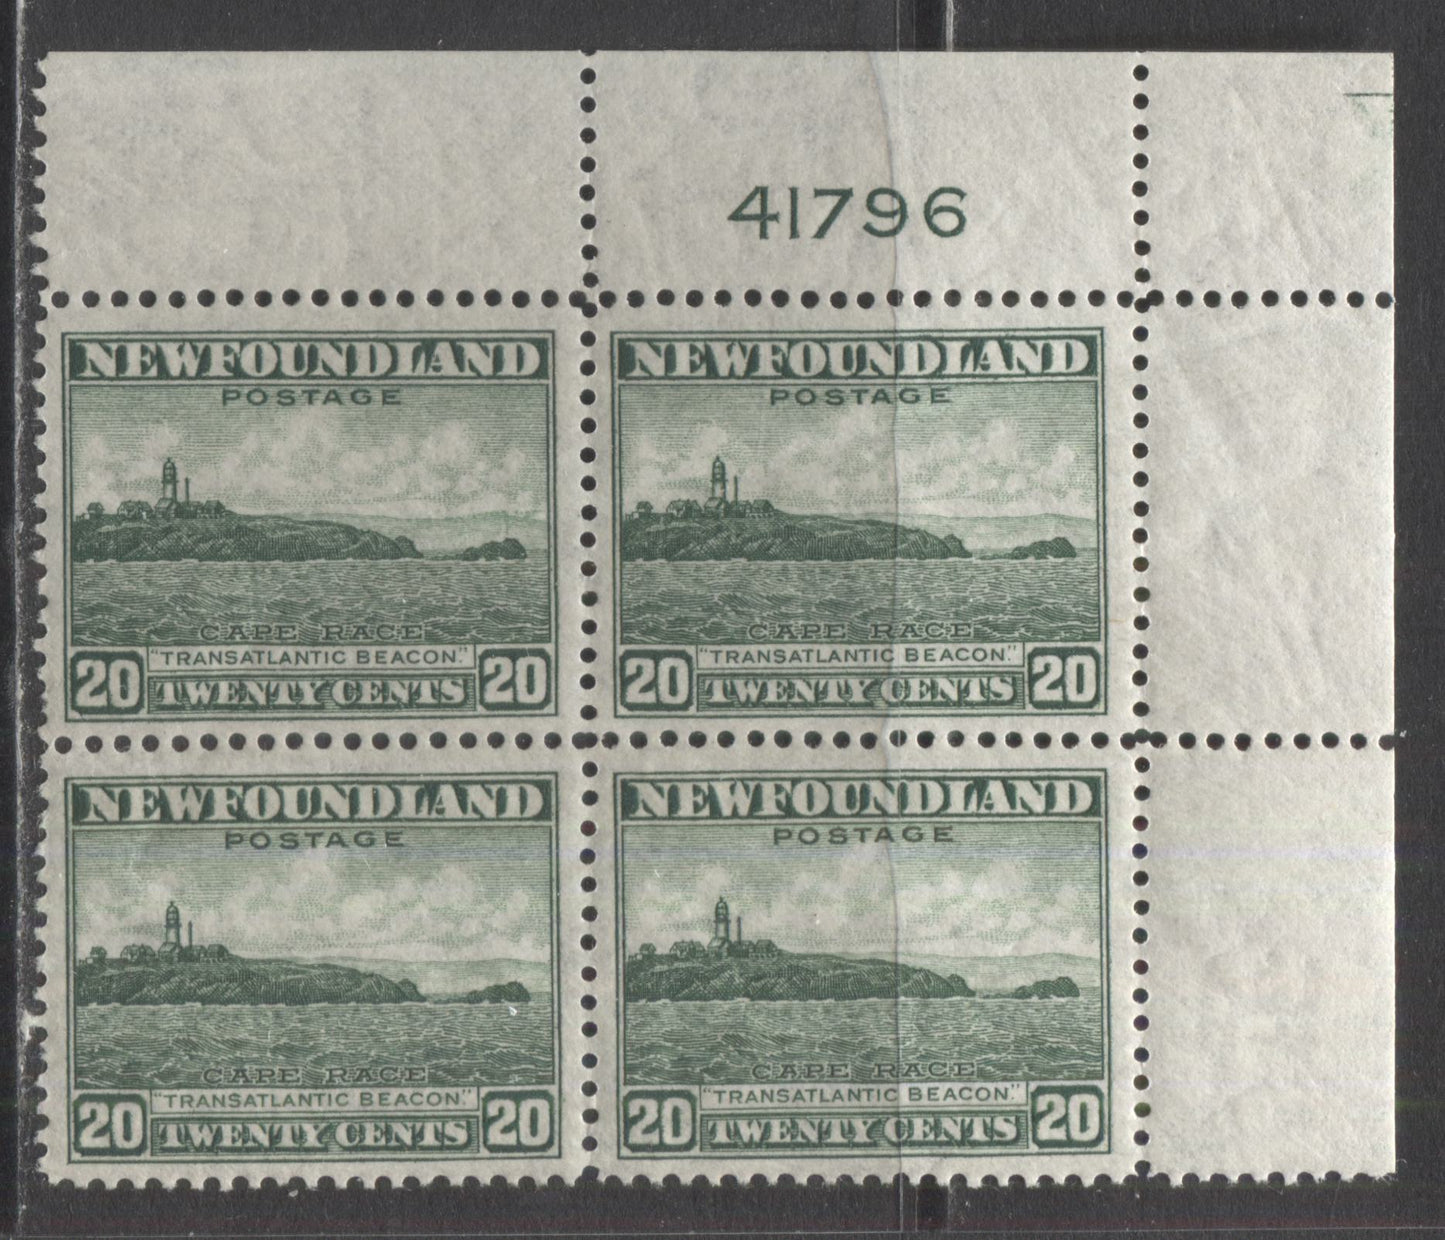 Lot 231 Newfoundland #263 20c Green Cape Race, 1941-1944 Resources Re-Issue, A VFNH UR Plate 41796 Block Of 4